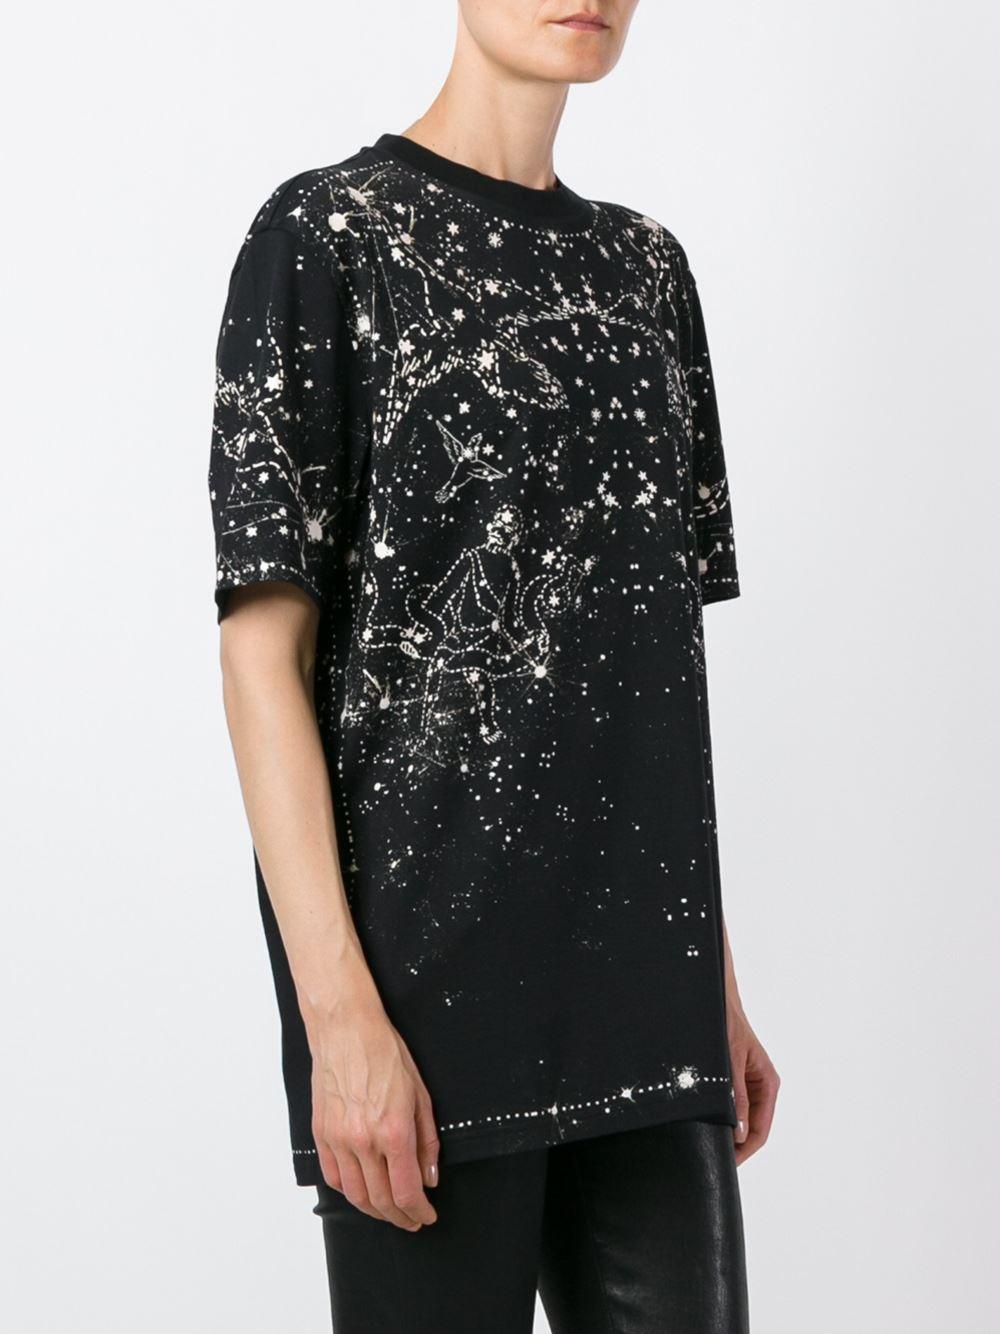 Givenchy Constellation Print T-shirt in Black | Lyst